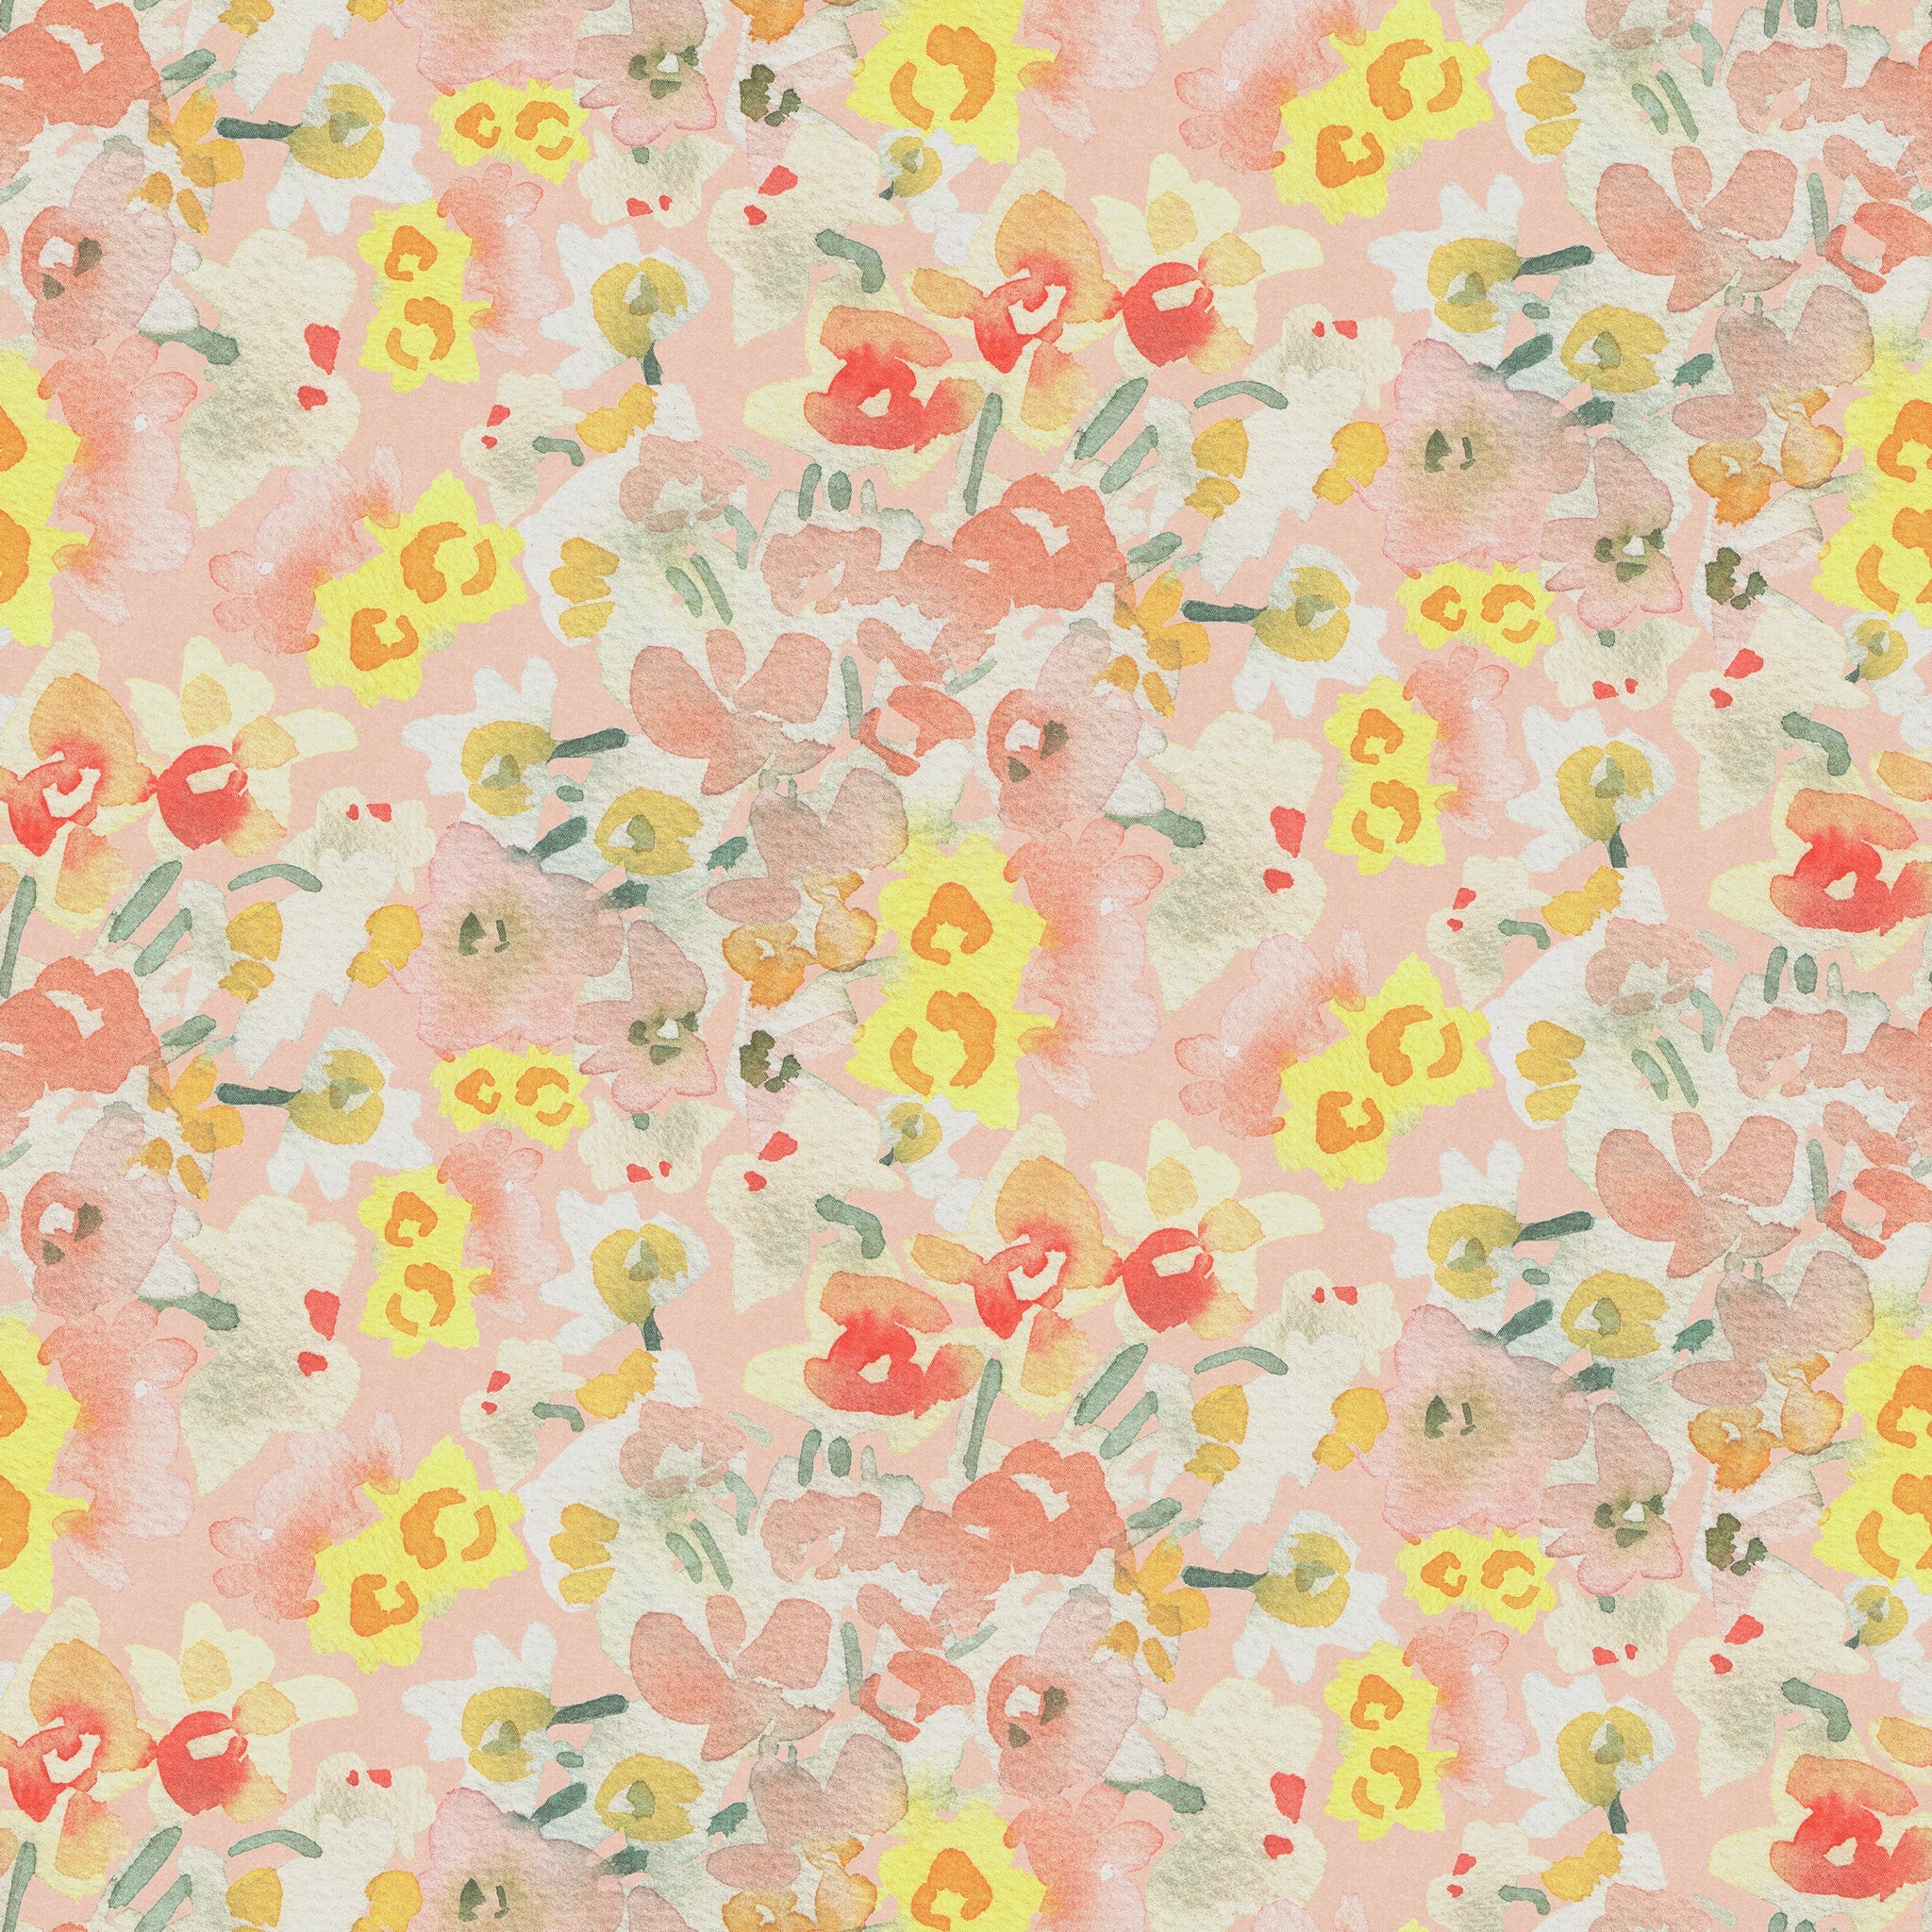 "Wall Blush's Susan Wallpaper with floral pattern in a cozy living room setting."

Note: The given image shows only the wallpaper pattern, but the alt text includes the type of room for SEO purposes despite the room not being visible. This assumes the wallpaper is intended for a living room based on its design, to optimize for search terms related to room wallpaper.